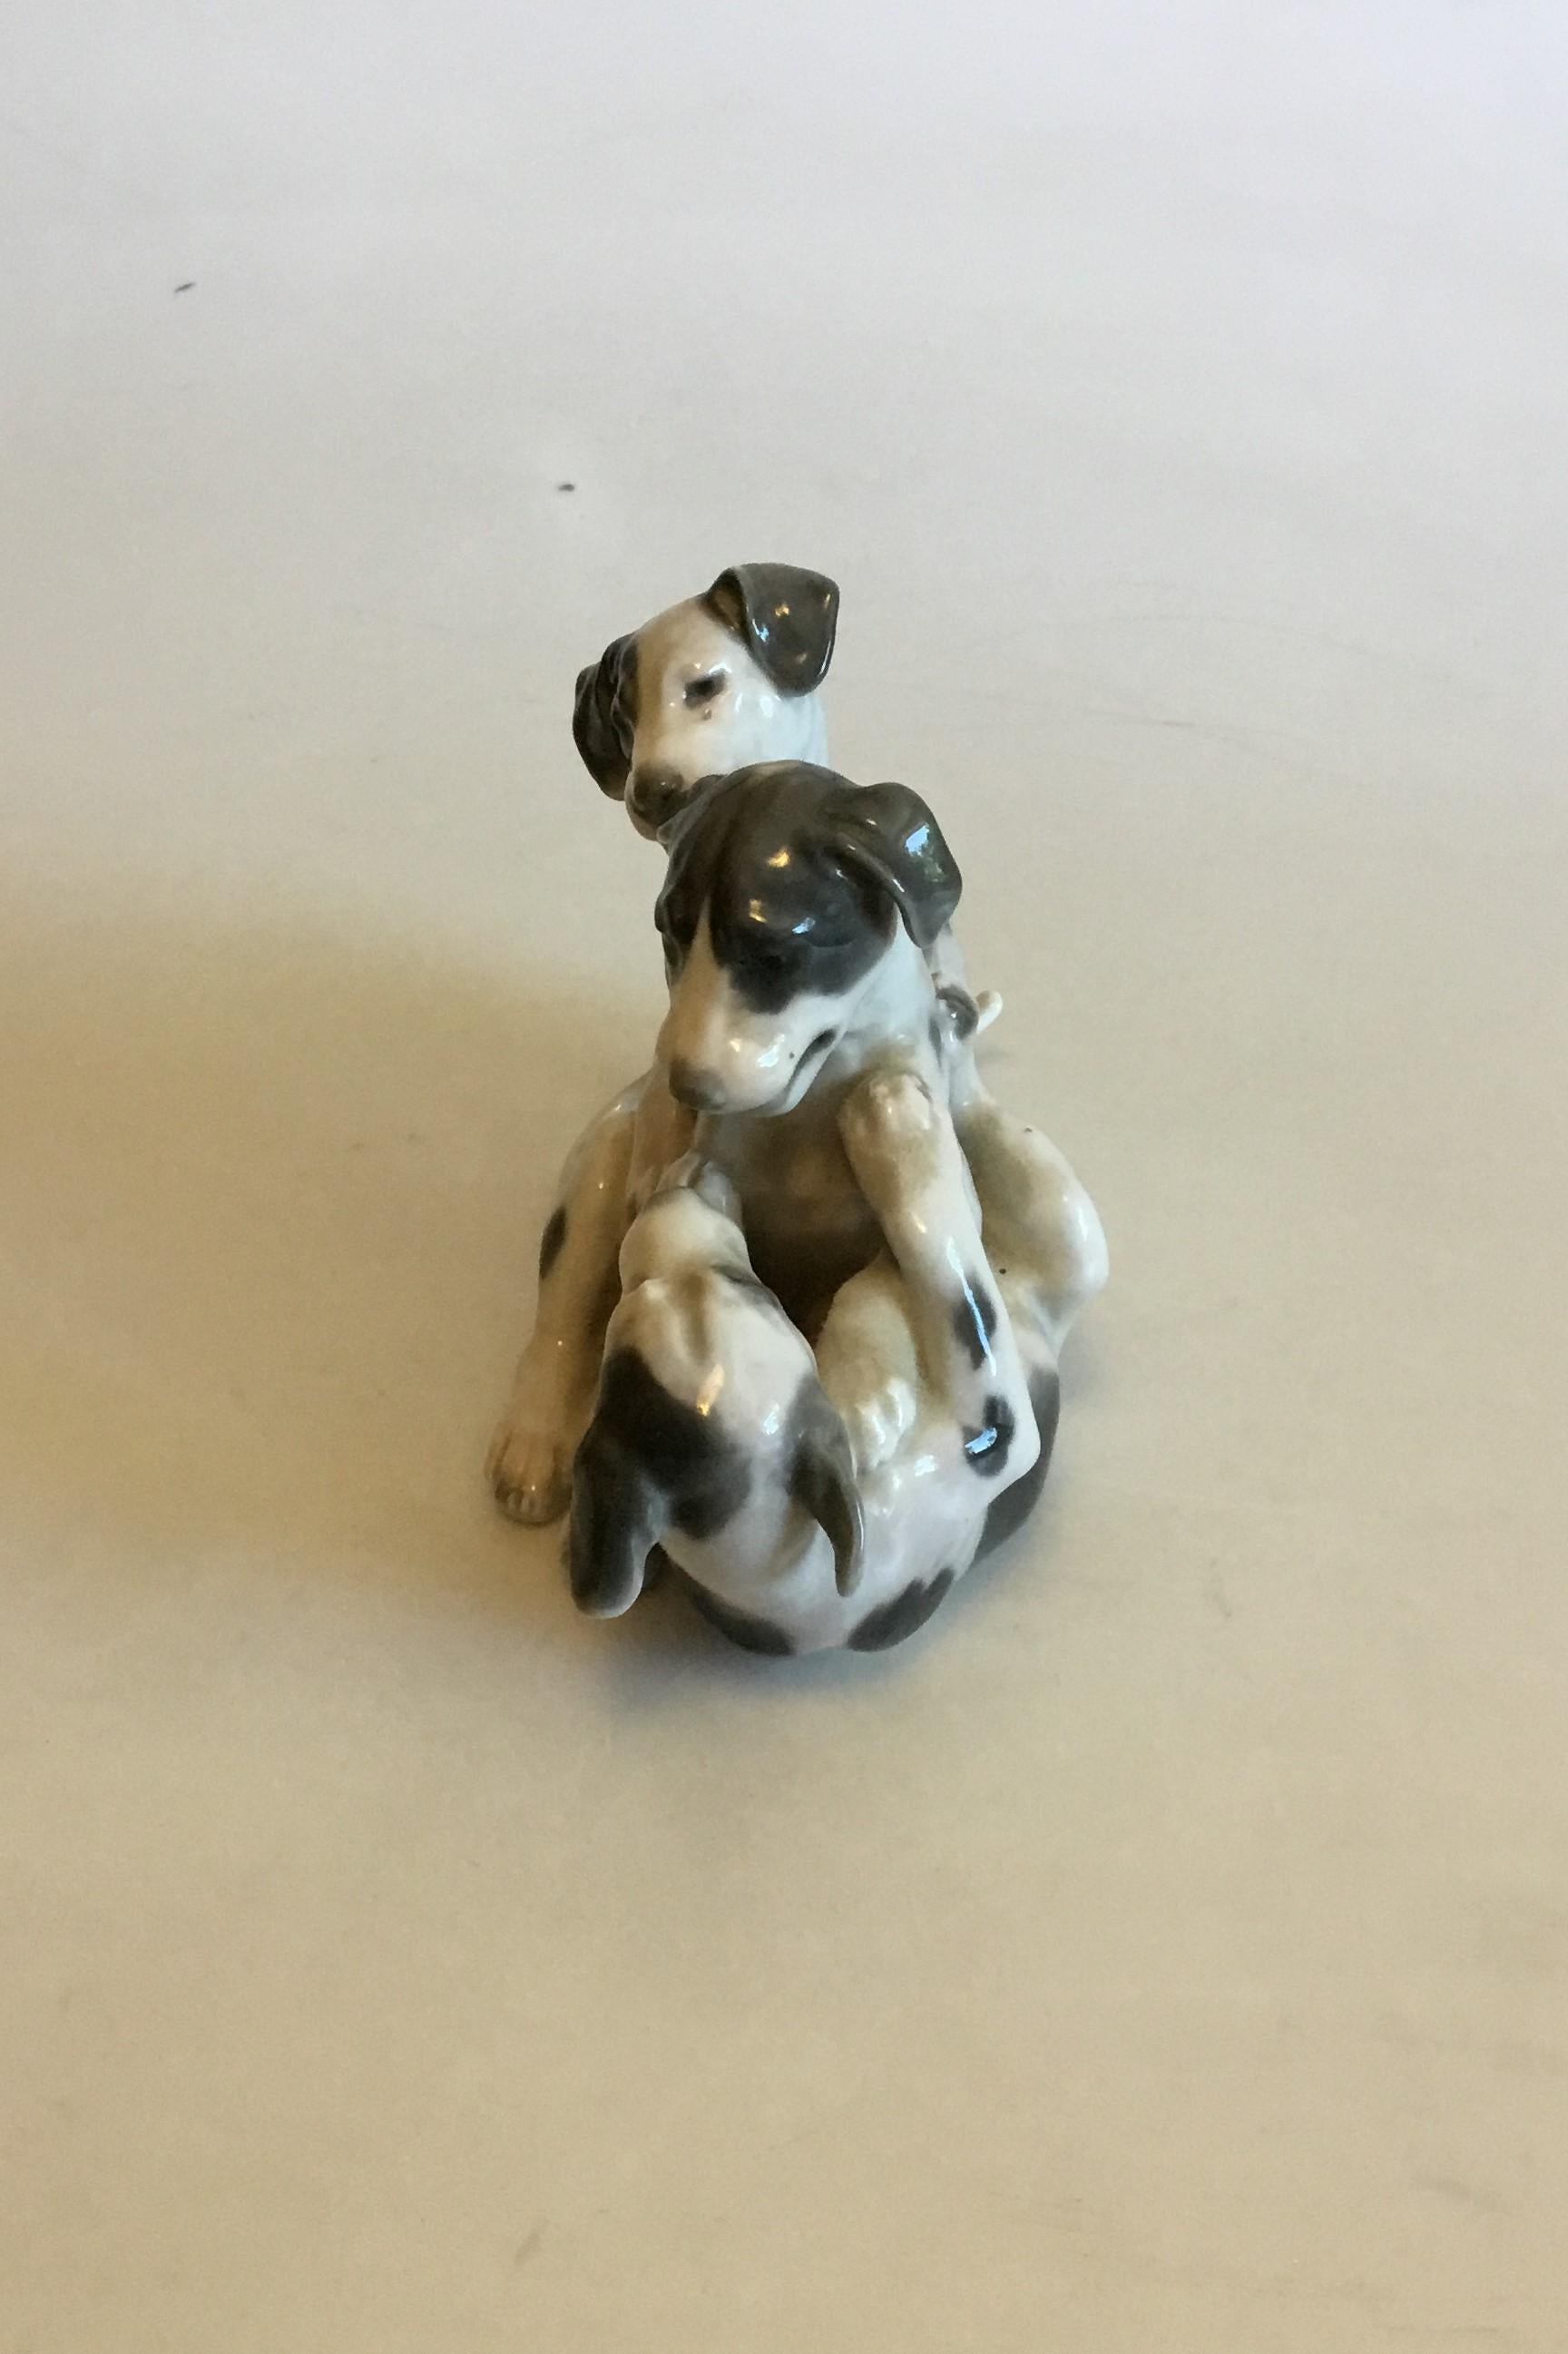 Bing & Grondahl figurine of three pointer puppies playing no 1815. Signed L.J. (Lauritz Jensen) The Tale is glued on.